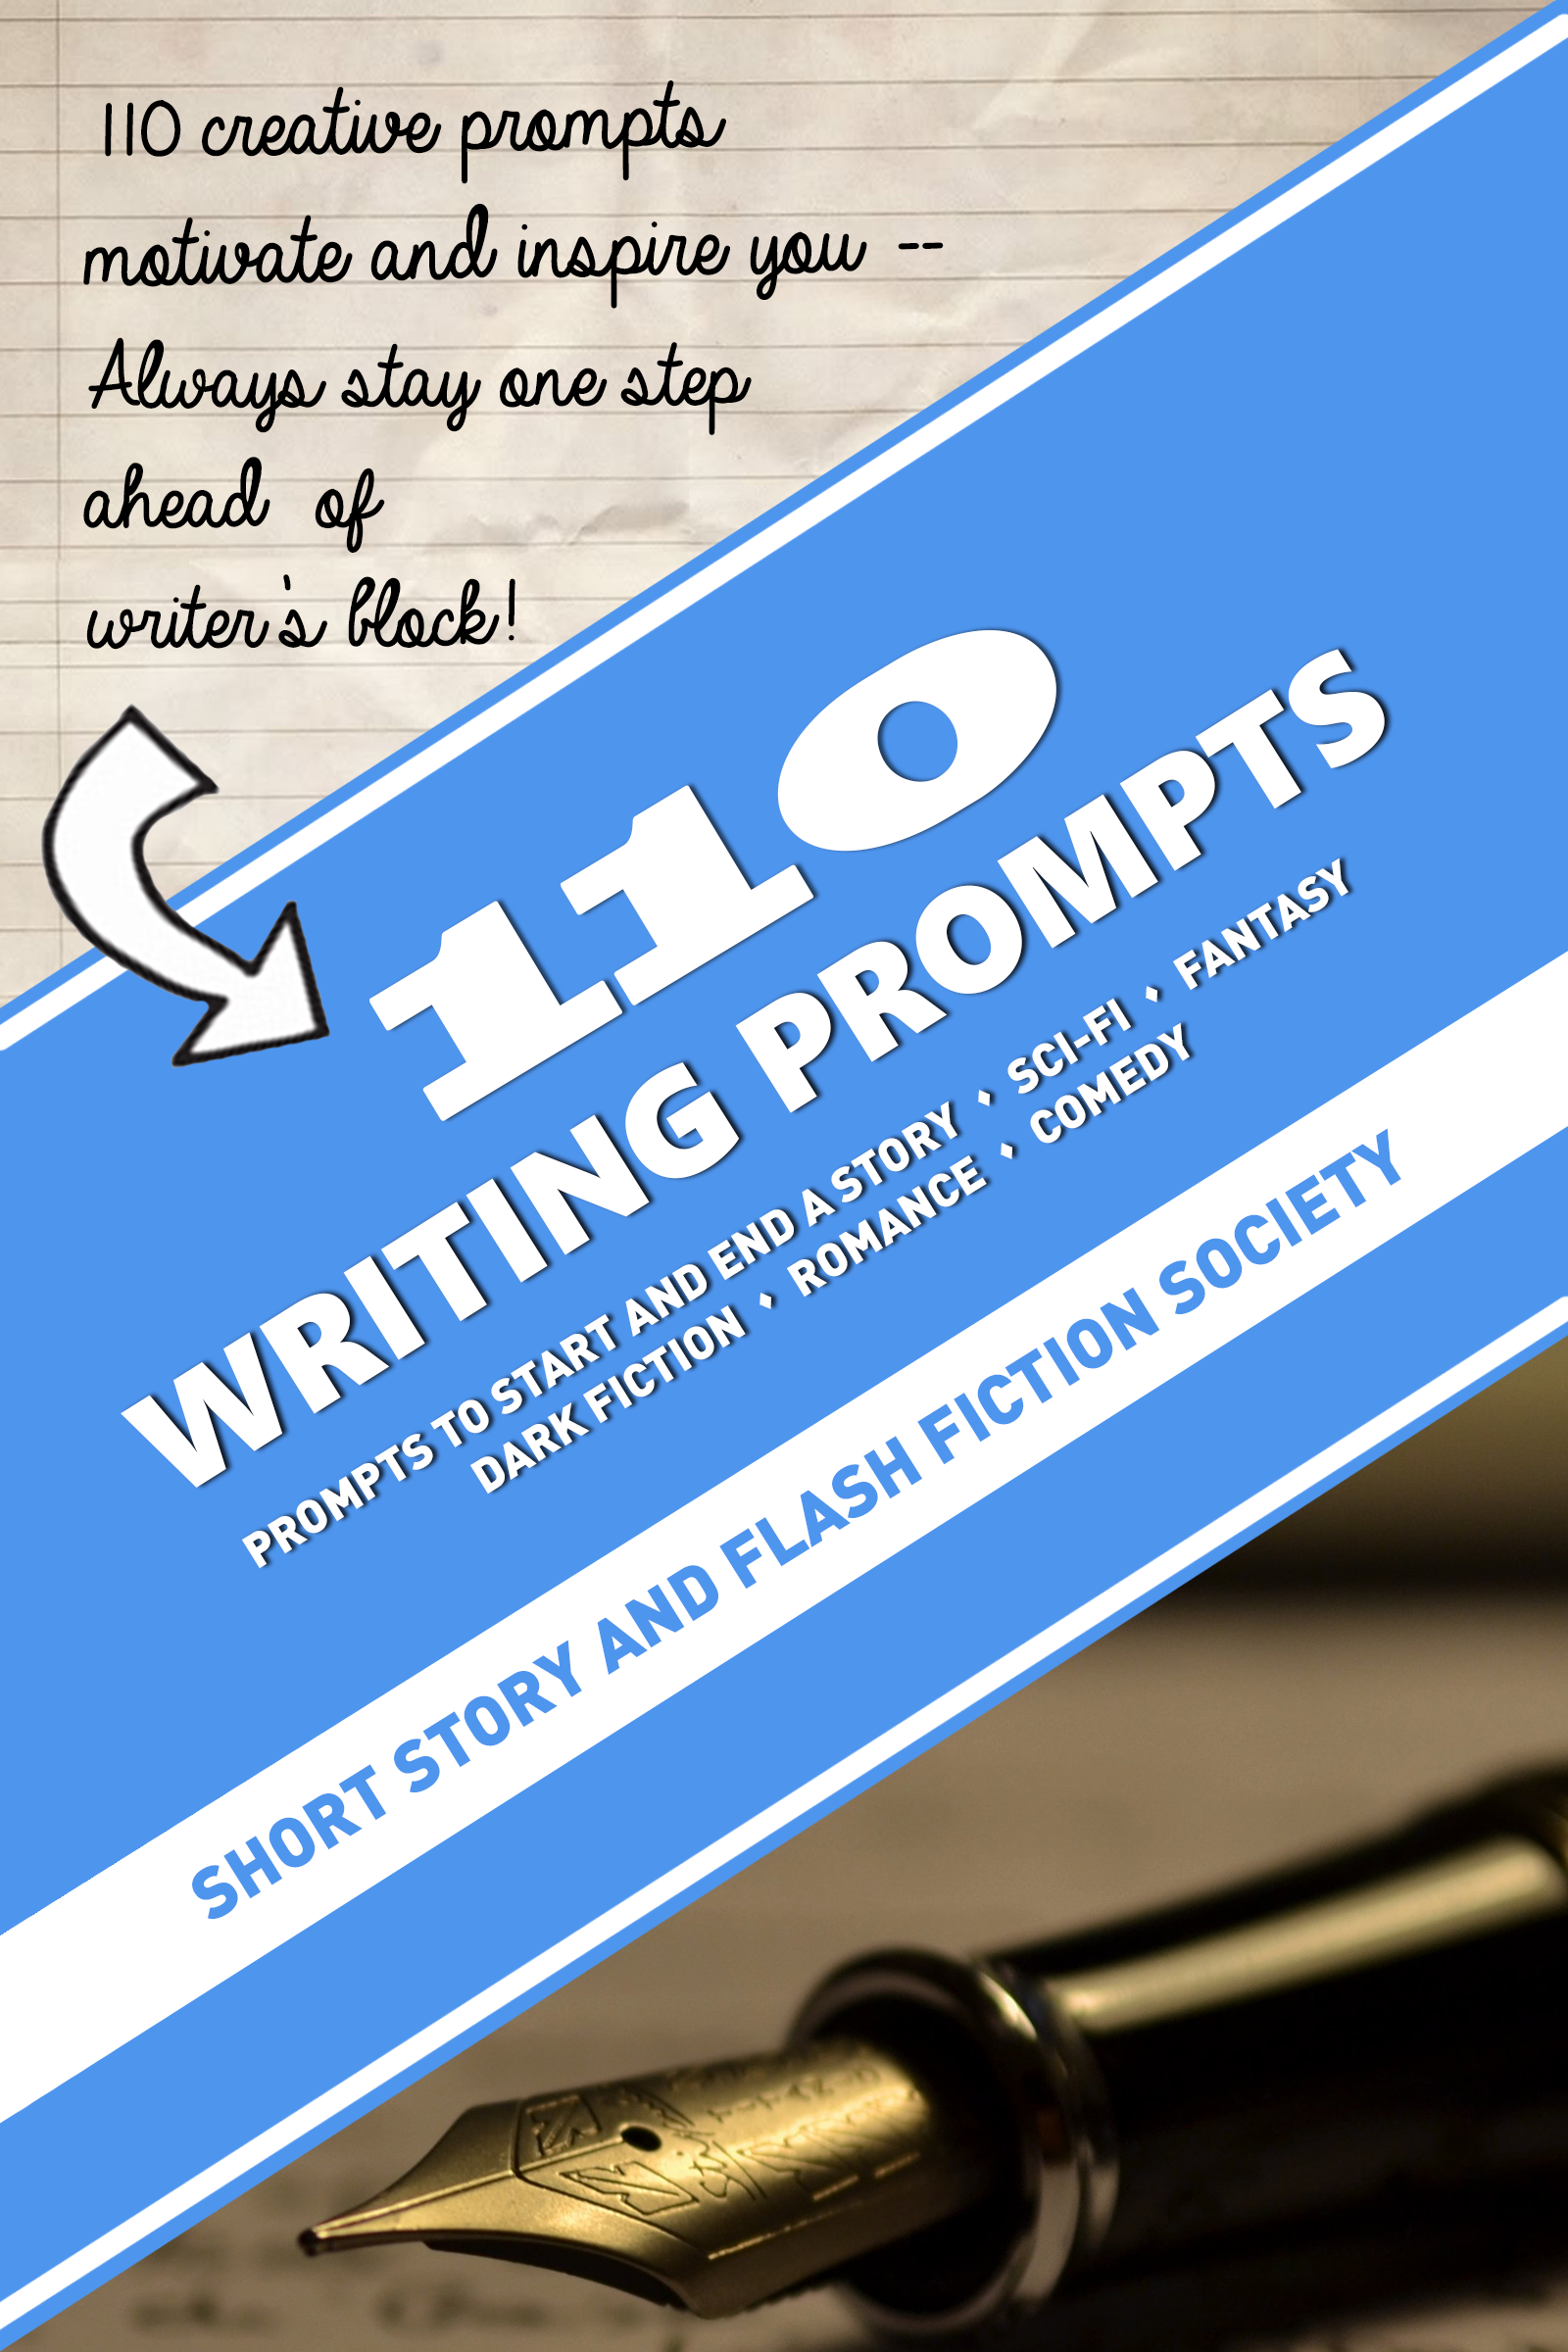 cover-prompts